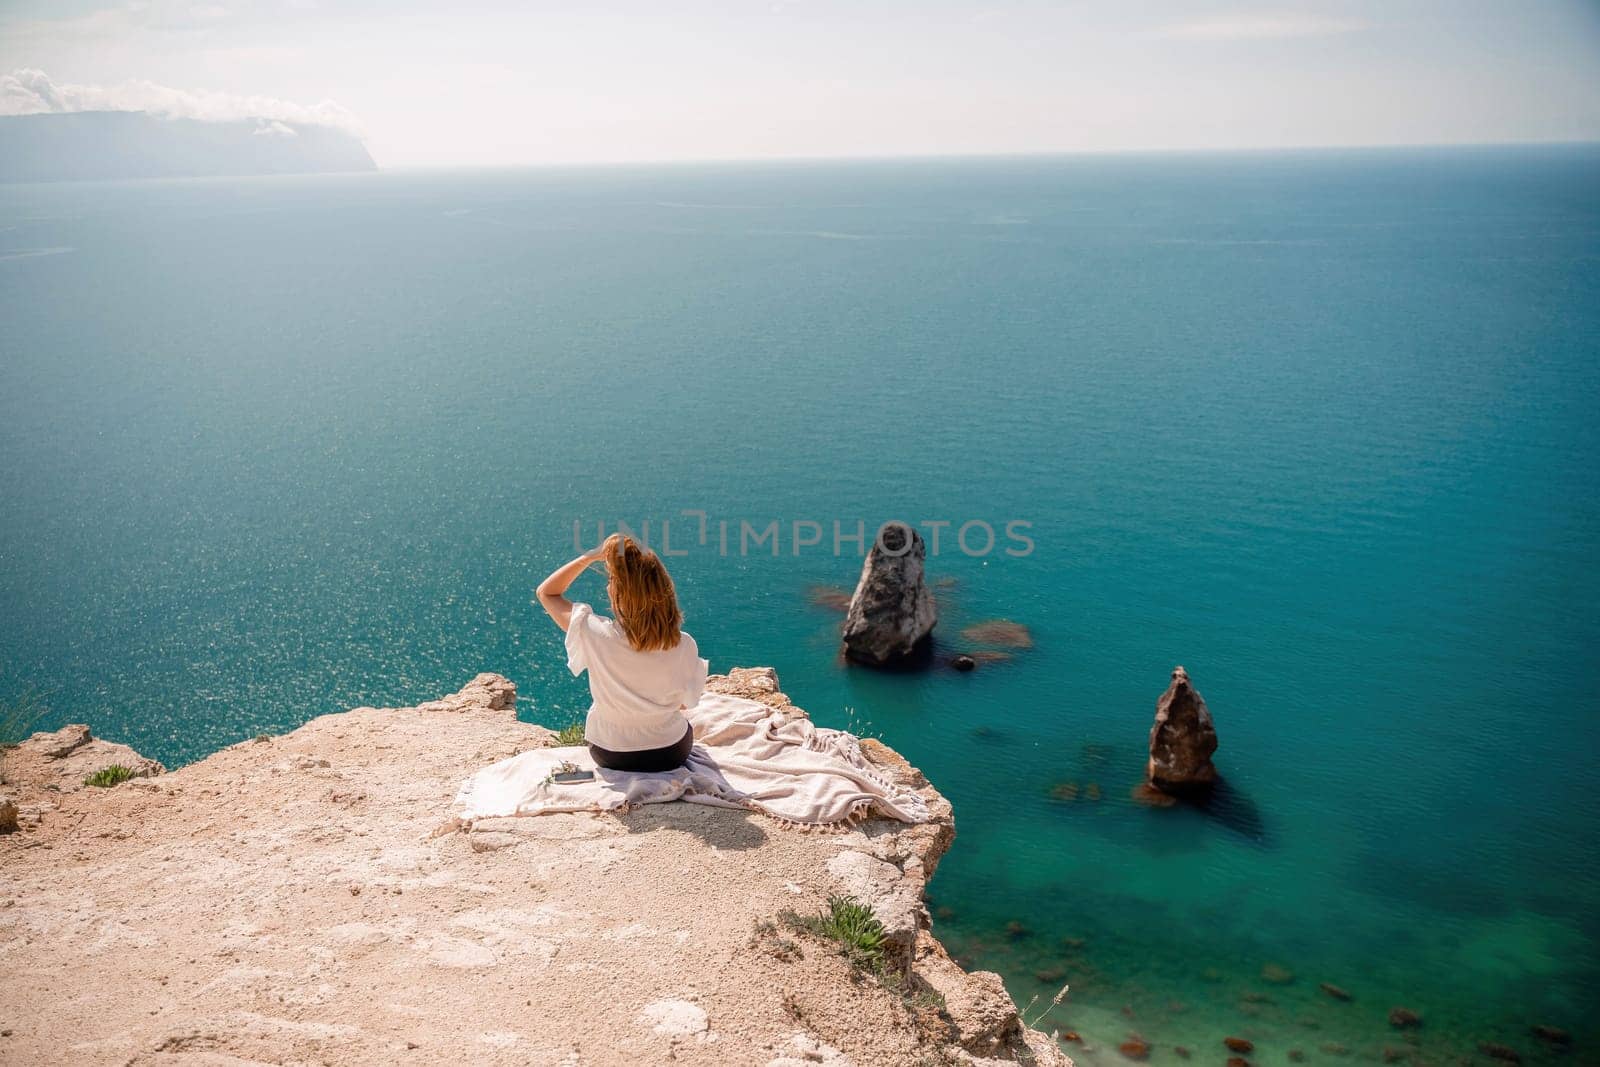 A woman is sitting on a rock overlooking the ocean. She is pointing to the water. The scene is peaceful and serene, with the woman enjoying the view and the calming sound of the waves. by Matiunina